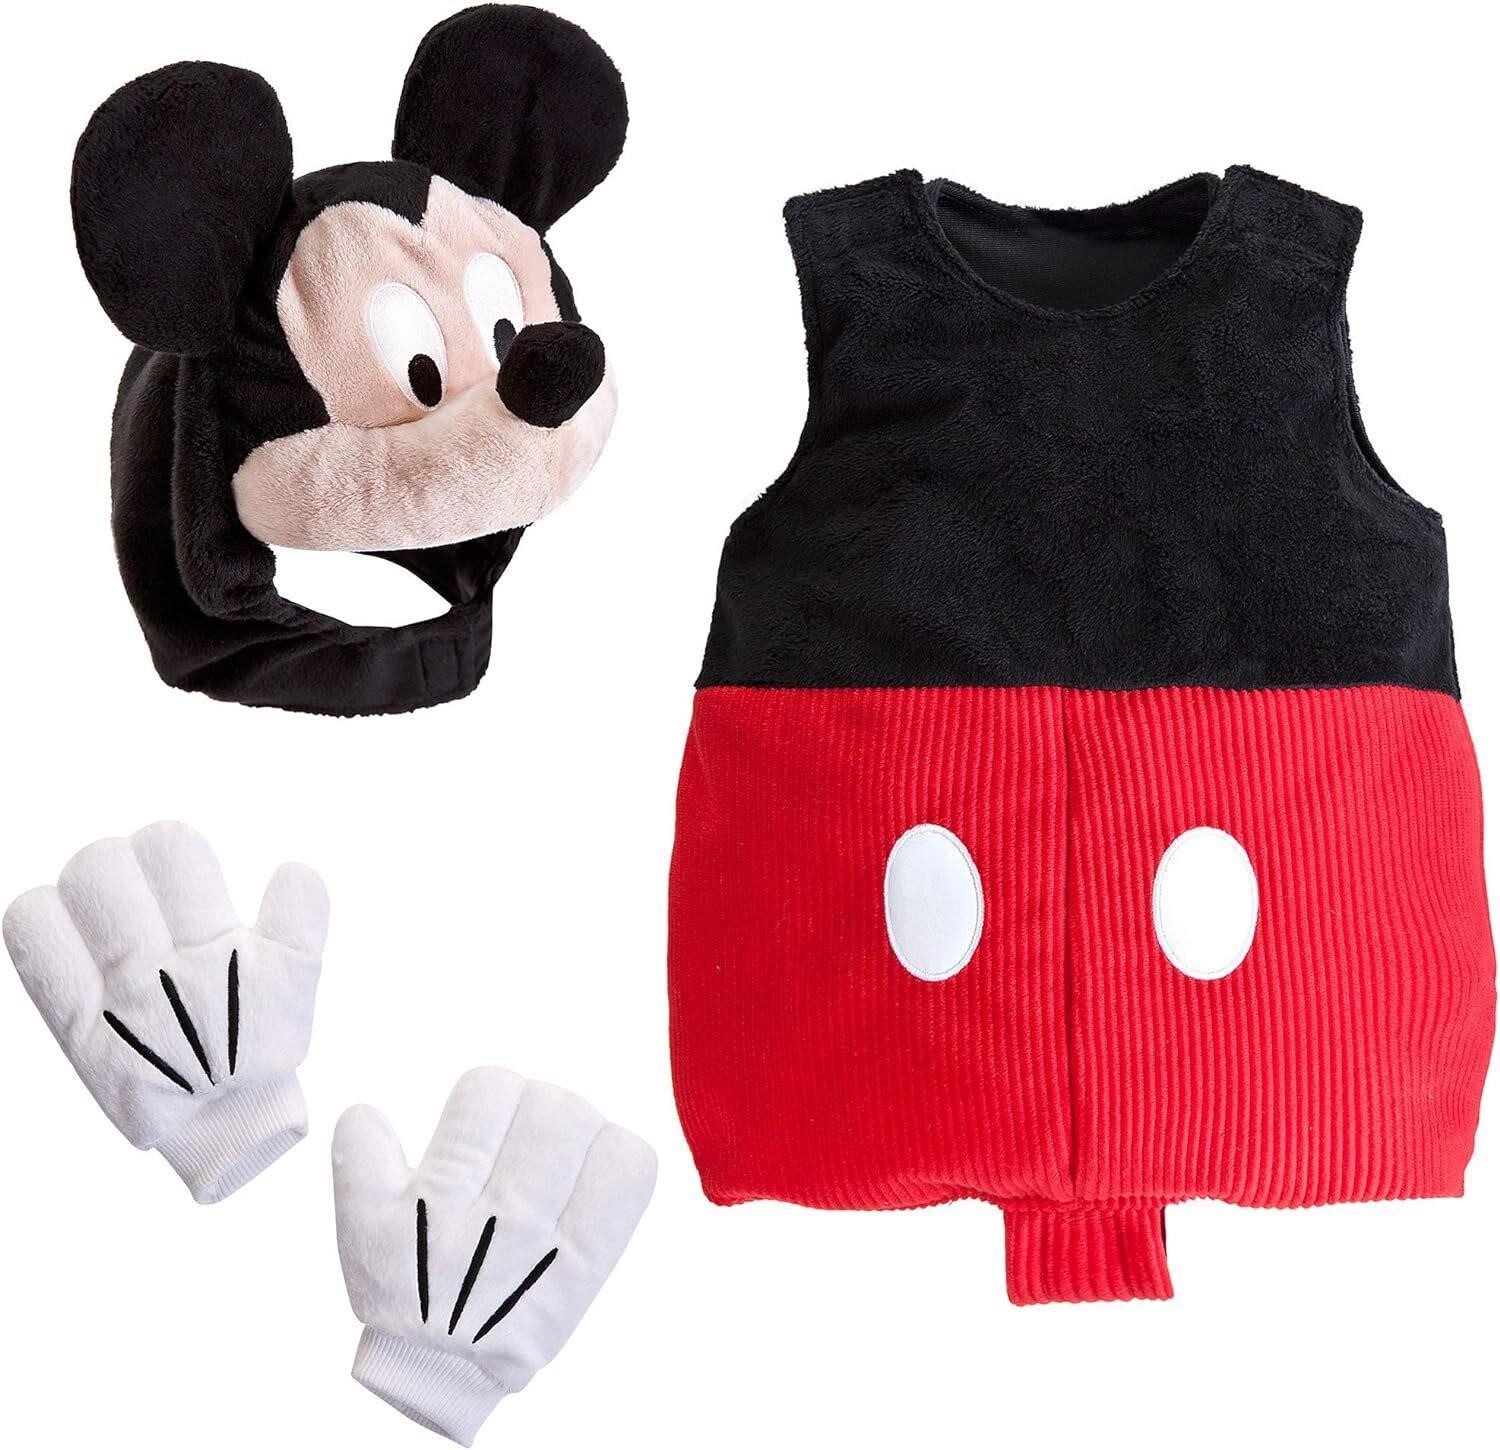 Disney Mickey Mouse Costume for Baby 12-18 MO